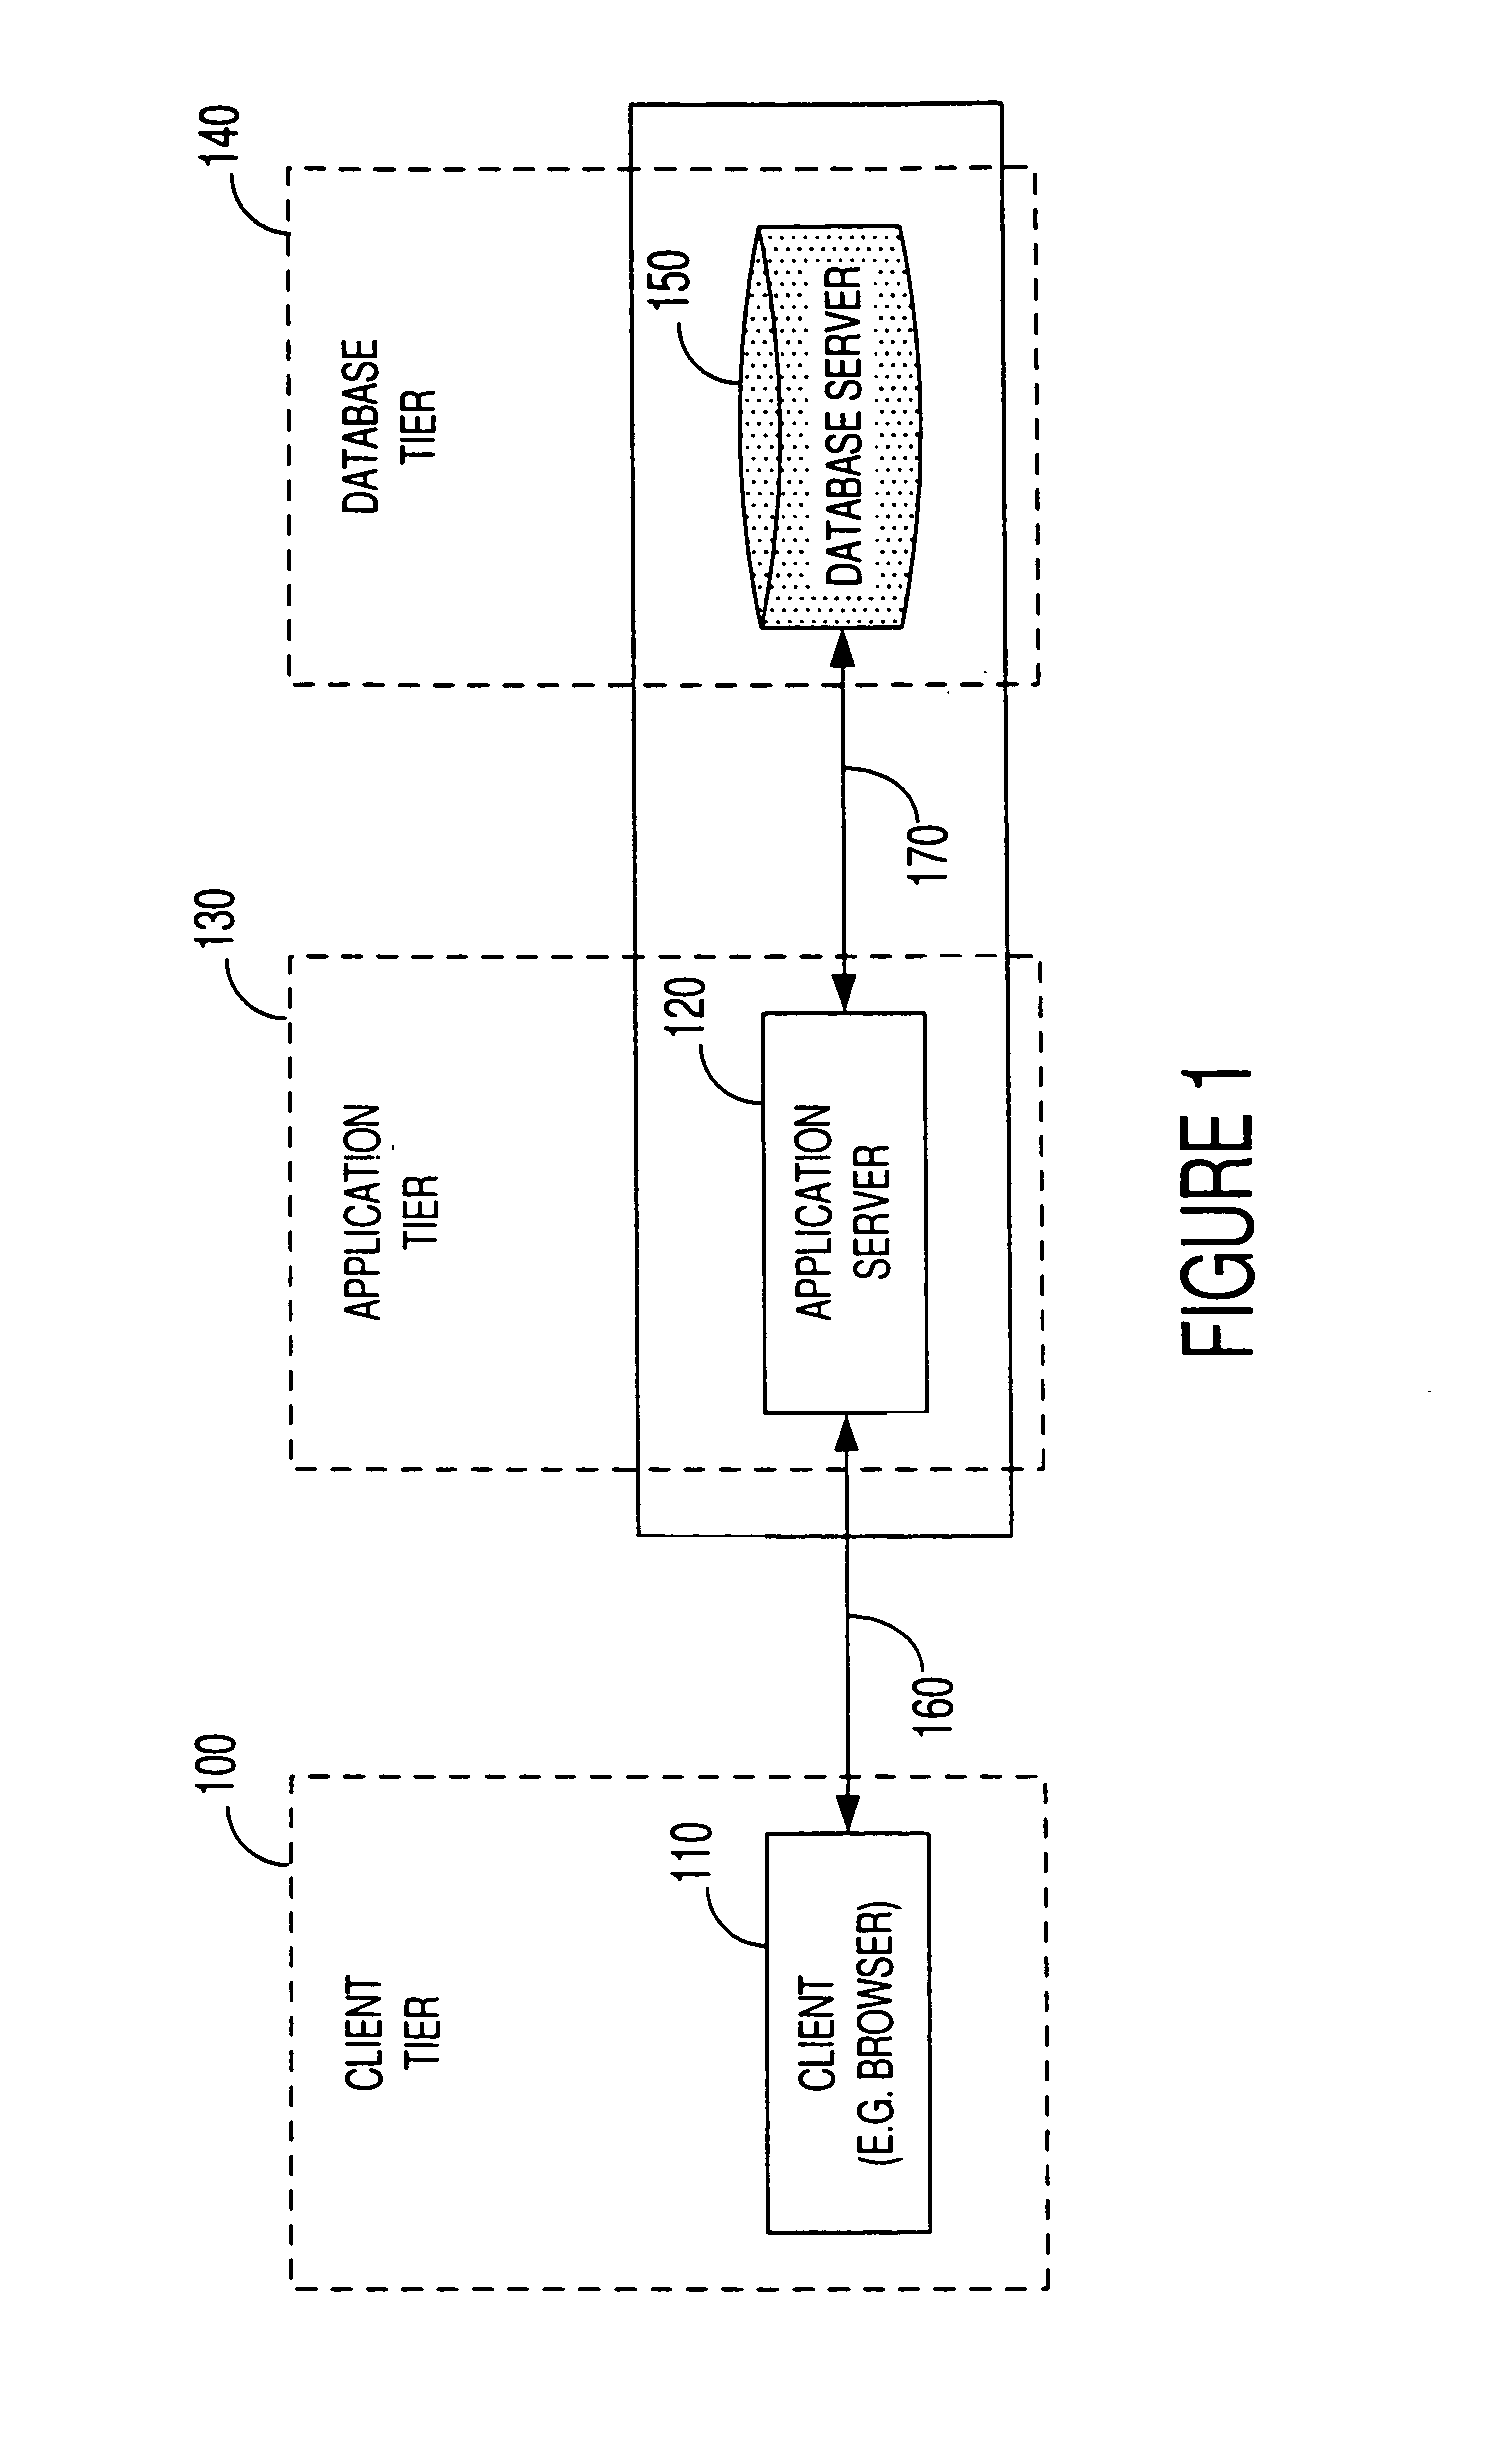 Method and apparatus for developing enterprise applications using design patterns